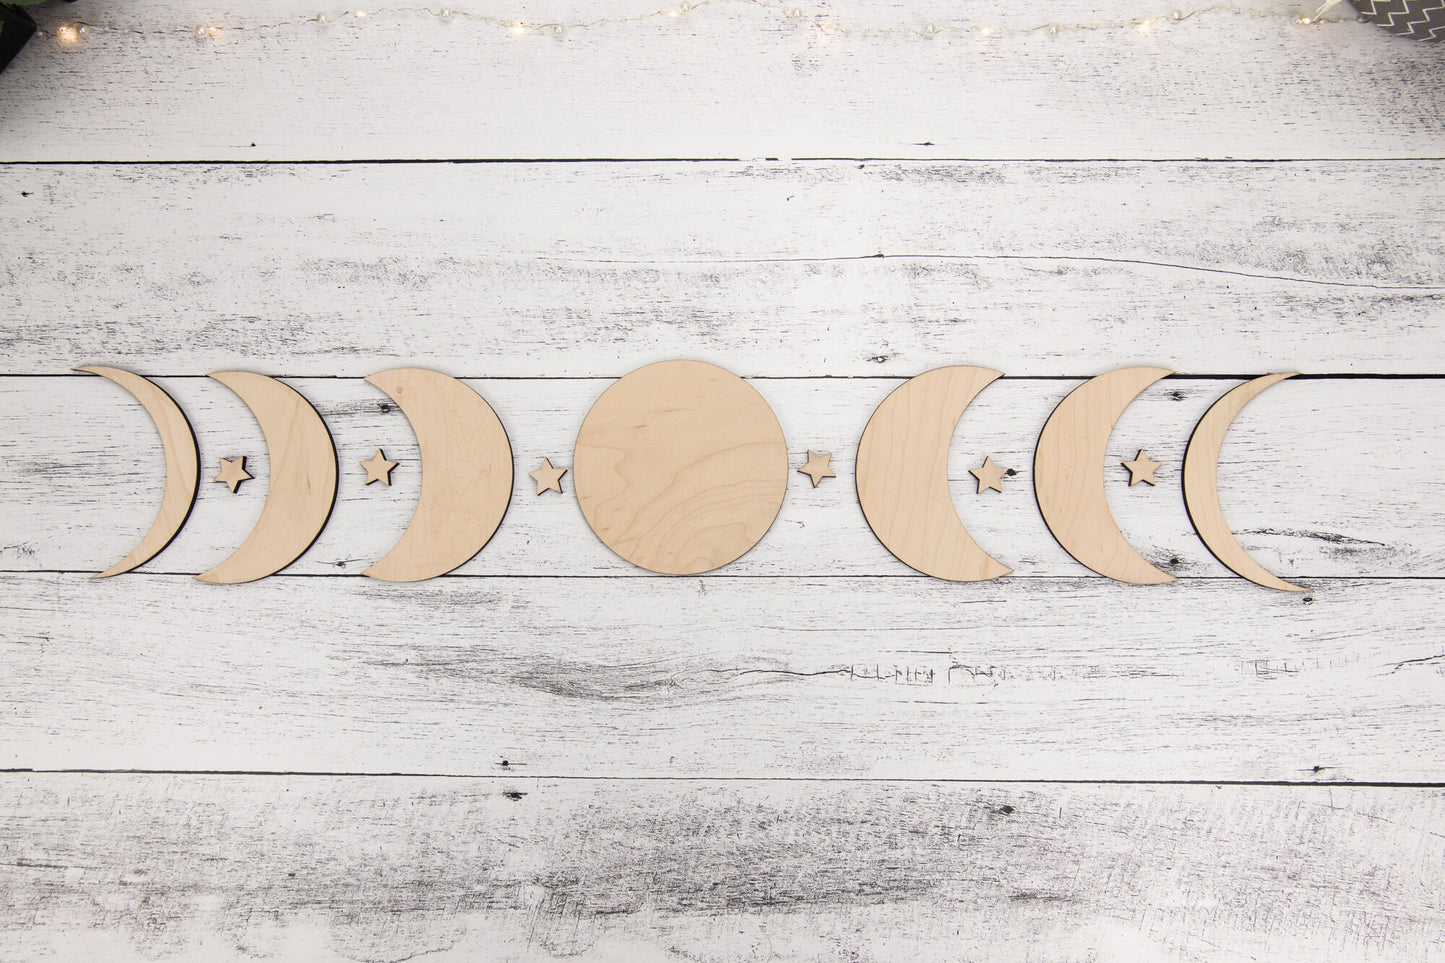 Moon Phase Wood Blanks for Home Decor, Crafts, or DIY sign making, Wooden Moons, Natural Bojo Decor, Wall hanging, Wall art, Crescent moons